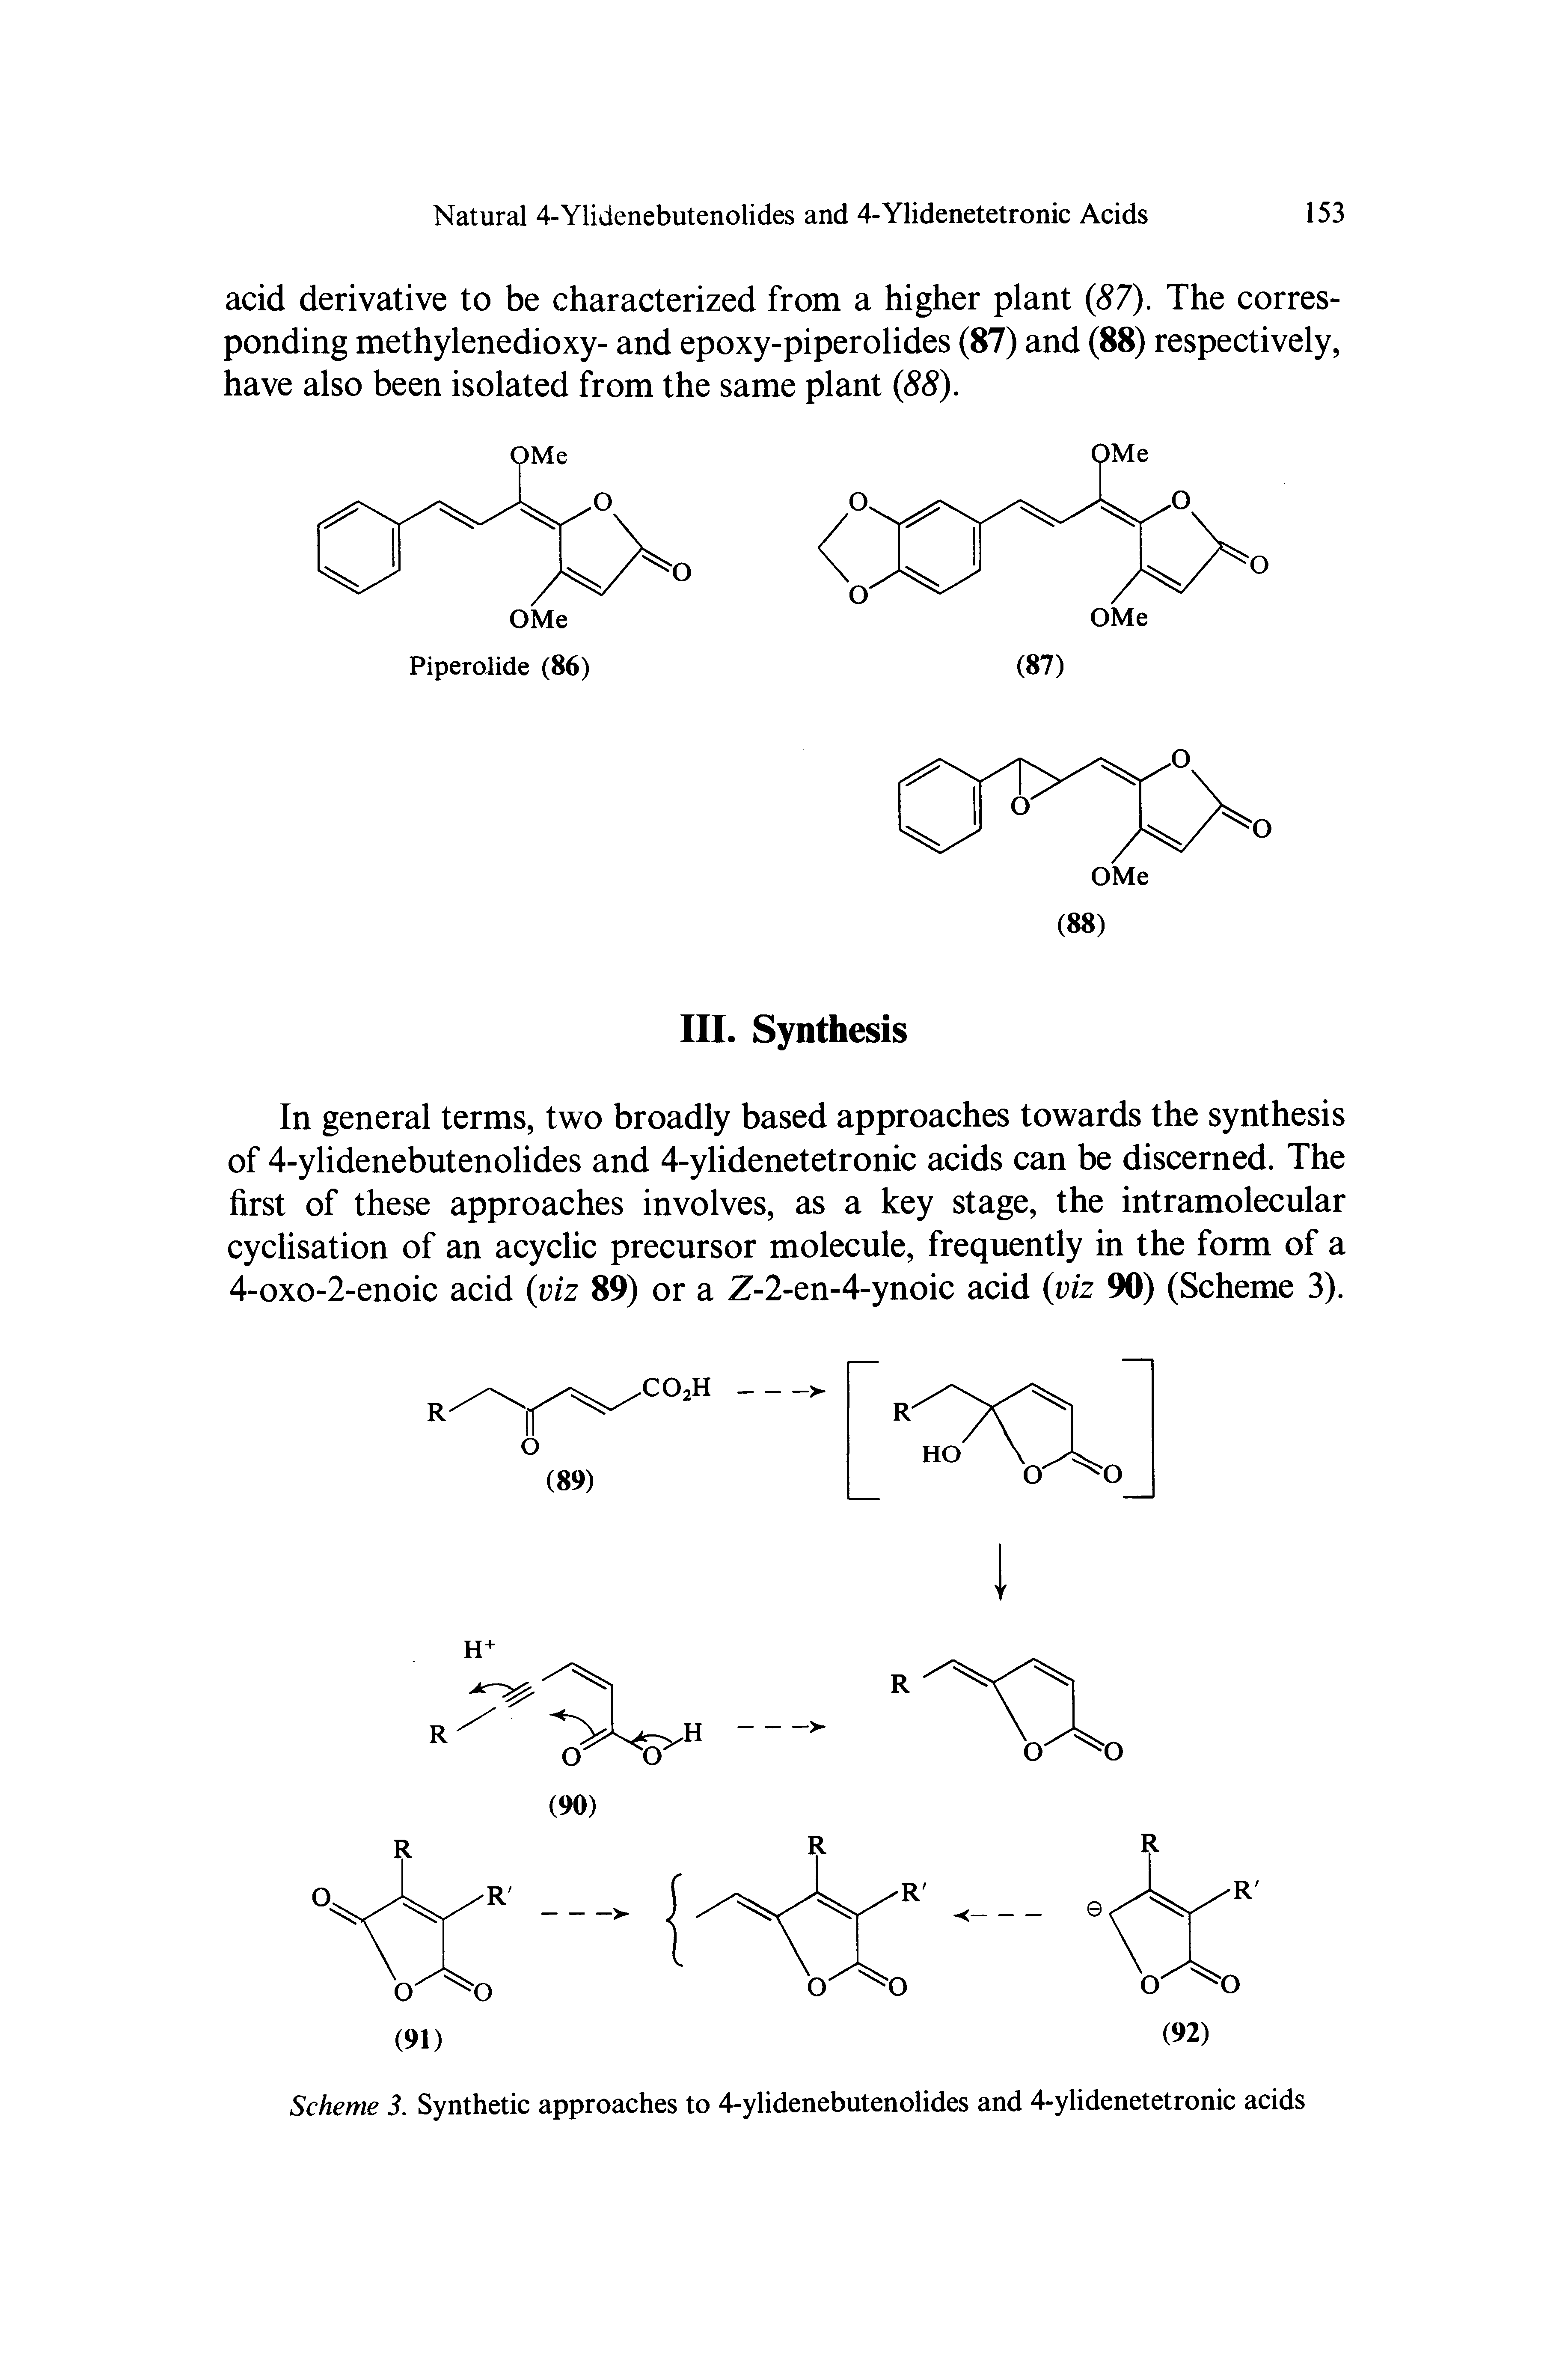 Scheme 3. Synthetic approaches to 4-ylidenebutenolides and 4-ylidenetetronic acids...